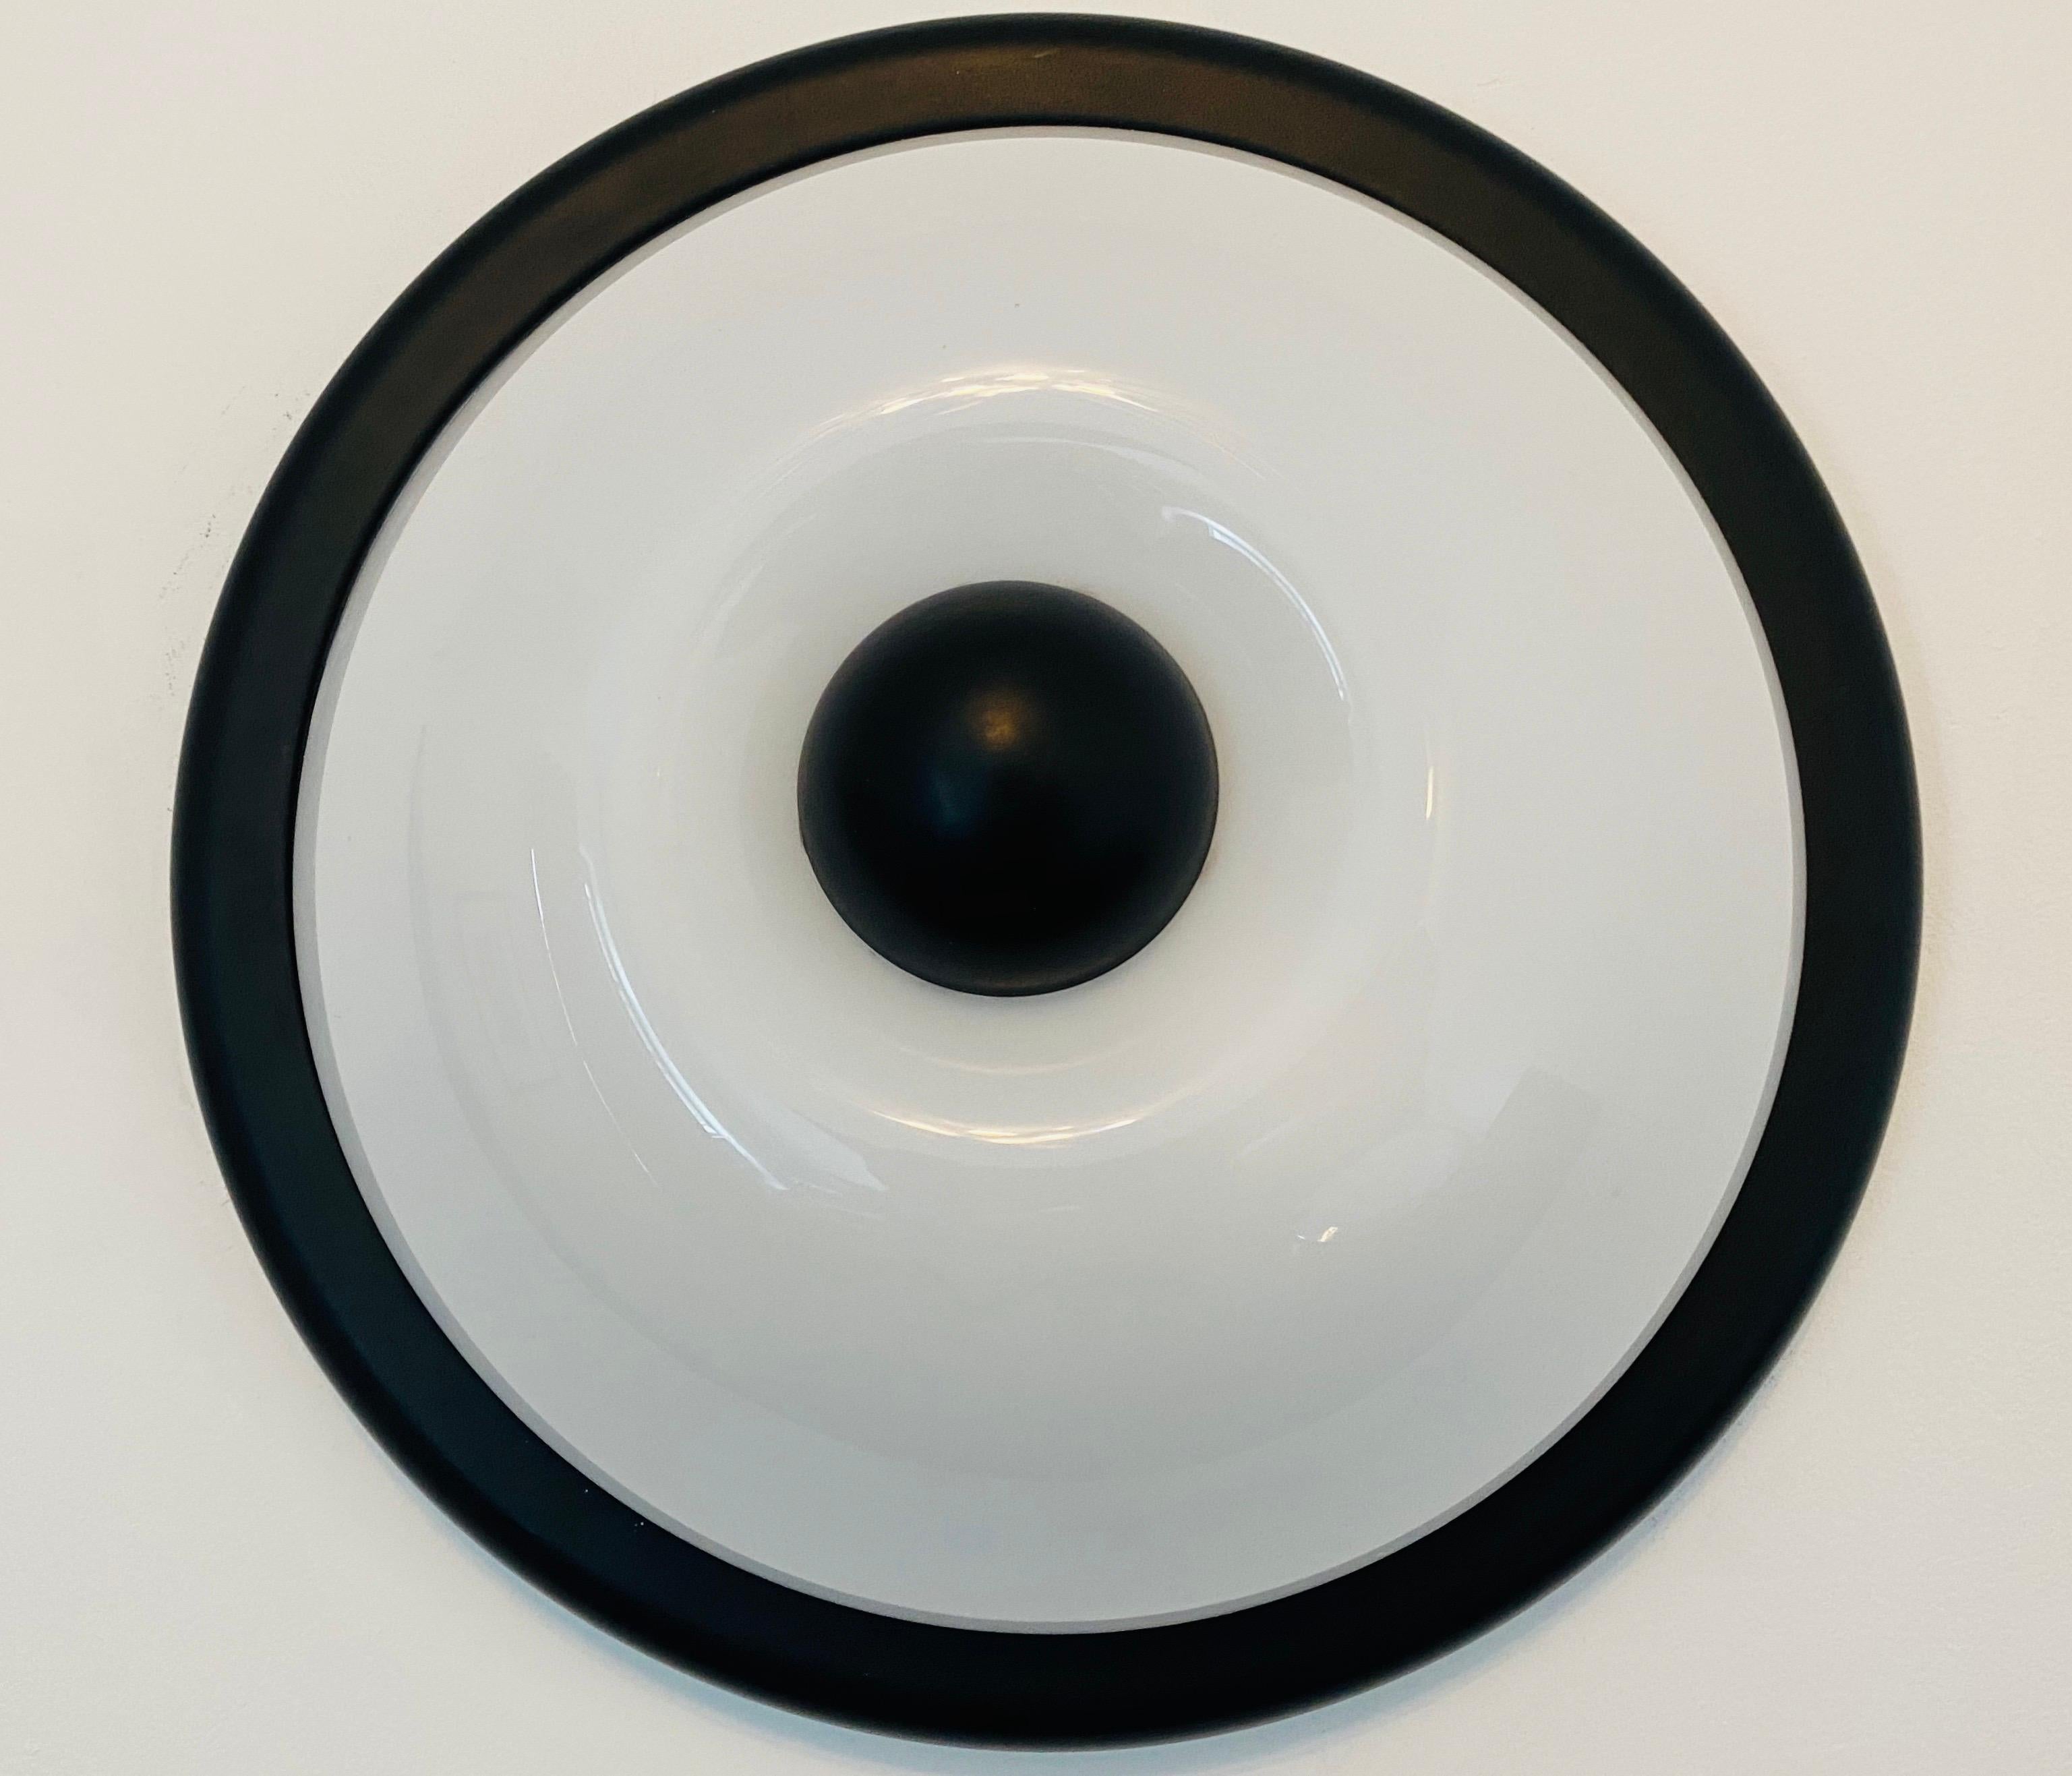 A 1980s high impact flush ceiling or wall light composed a black enamel frame and finial and a white resin shade. Made by the Italian lighting maker, Fabbian. Rewired.